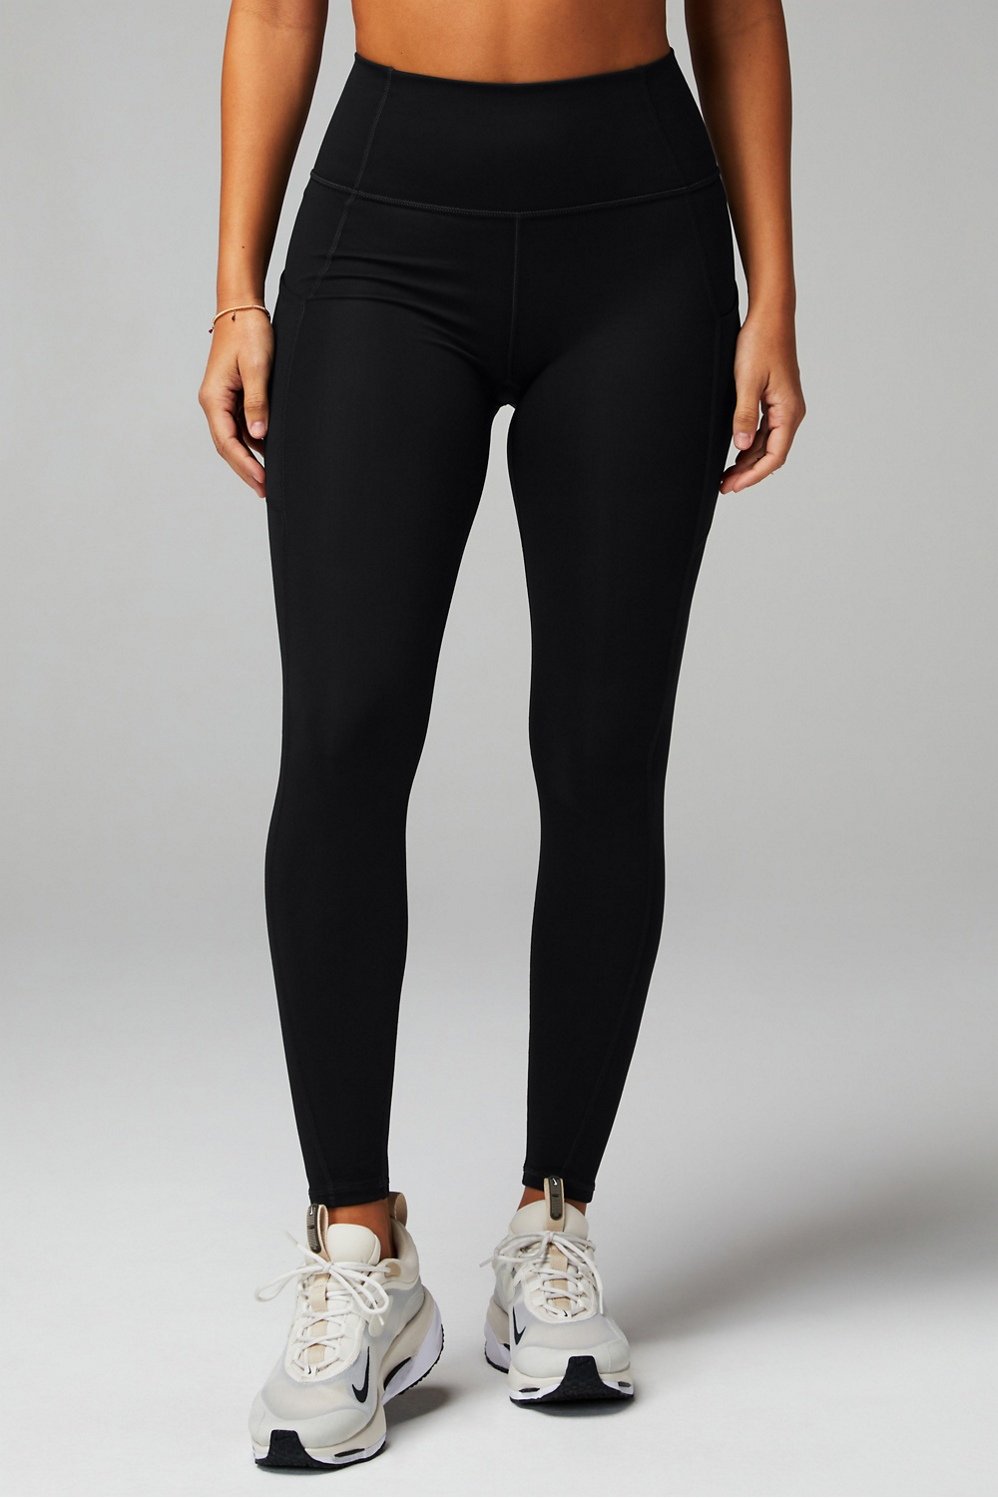 Fabletics, Pants & Jumpsuits, Nwt Fabletics Oasis High Waisted Legging